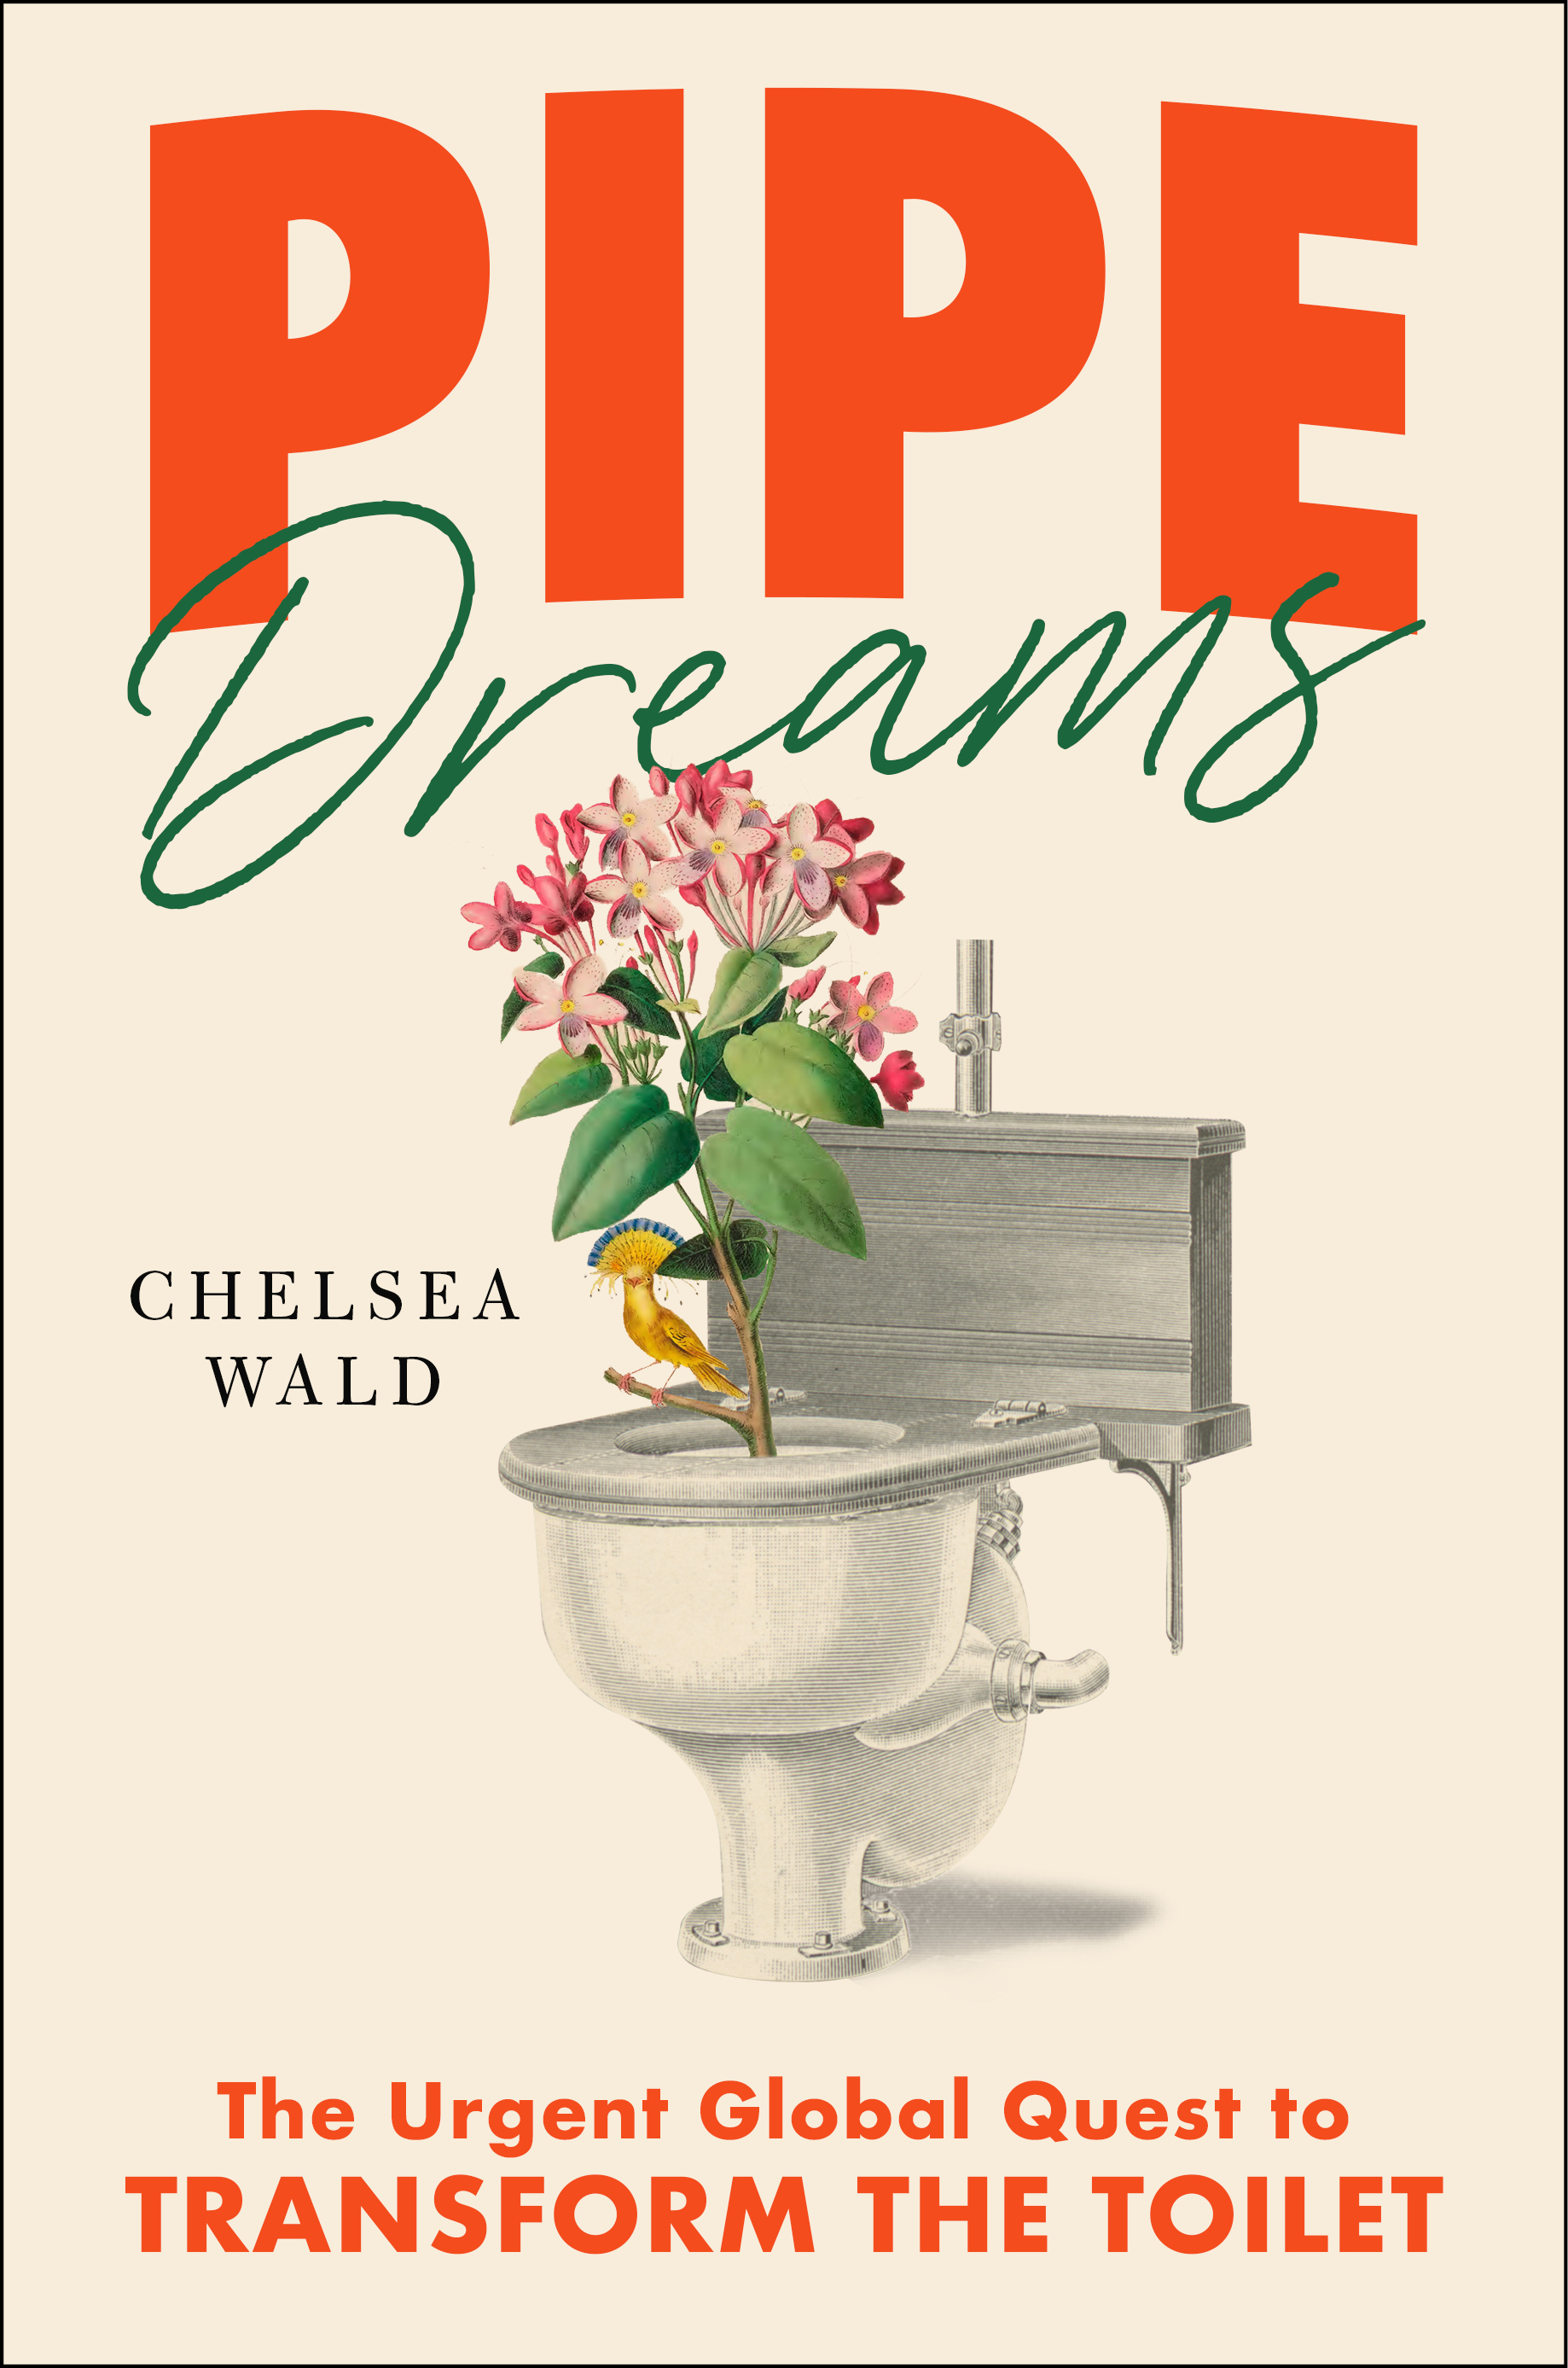 book cover showing a drawing of a toilet with flowers growing in it